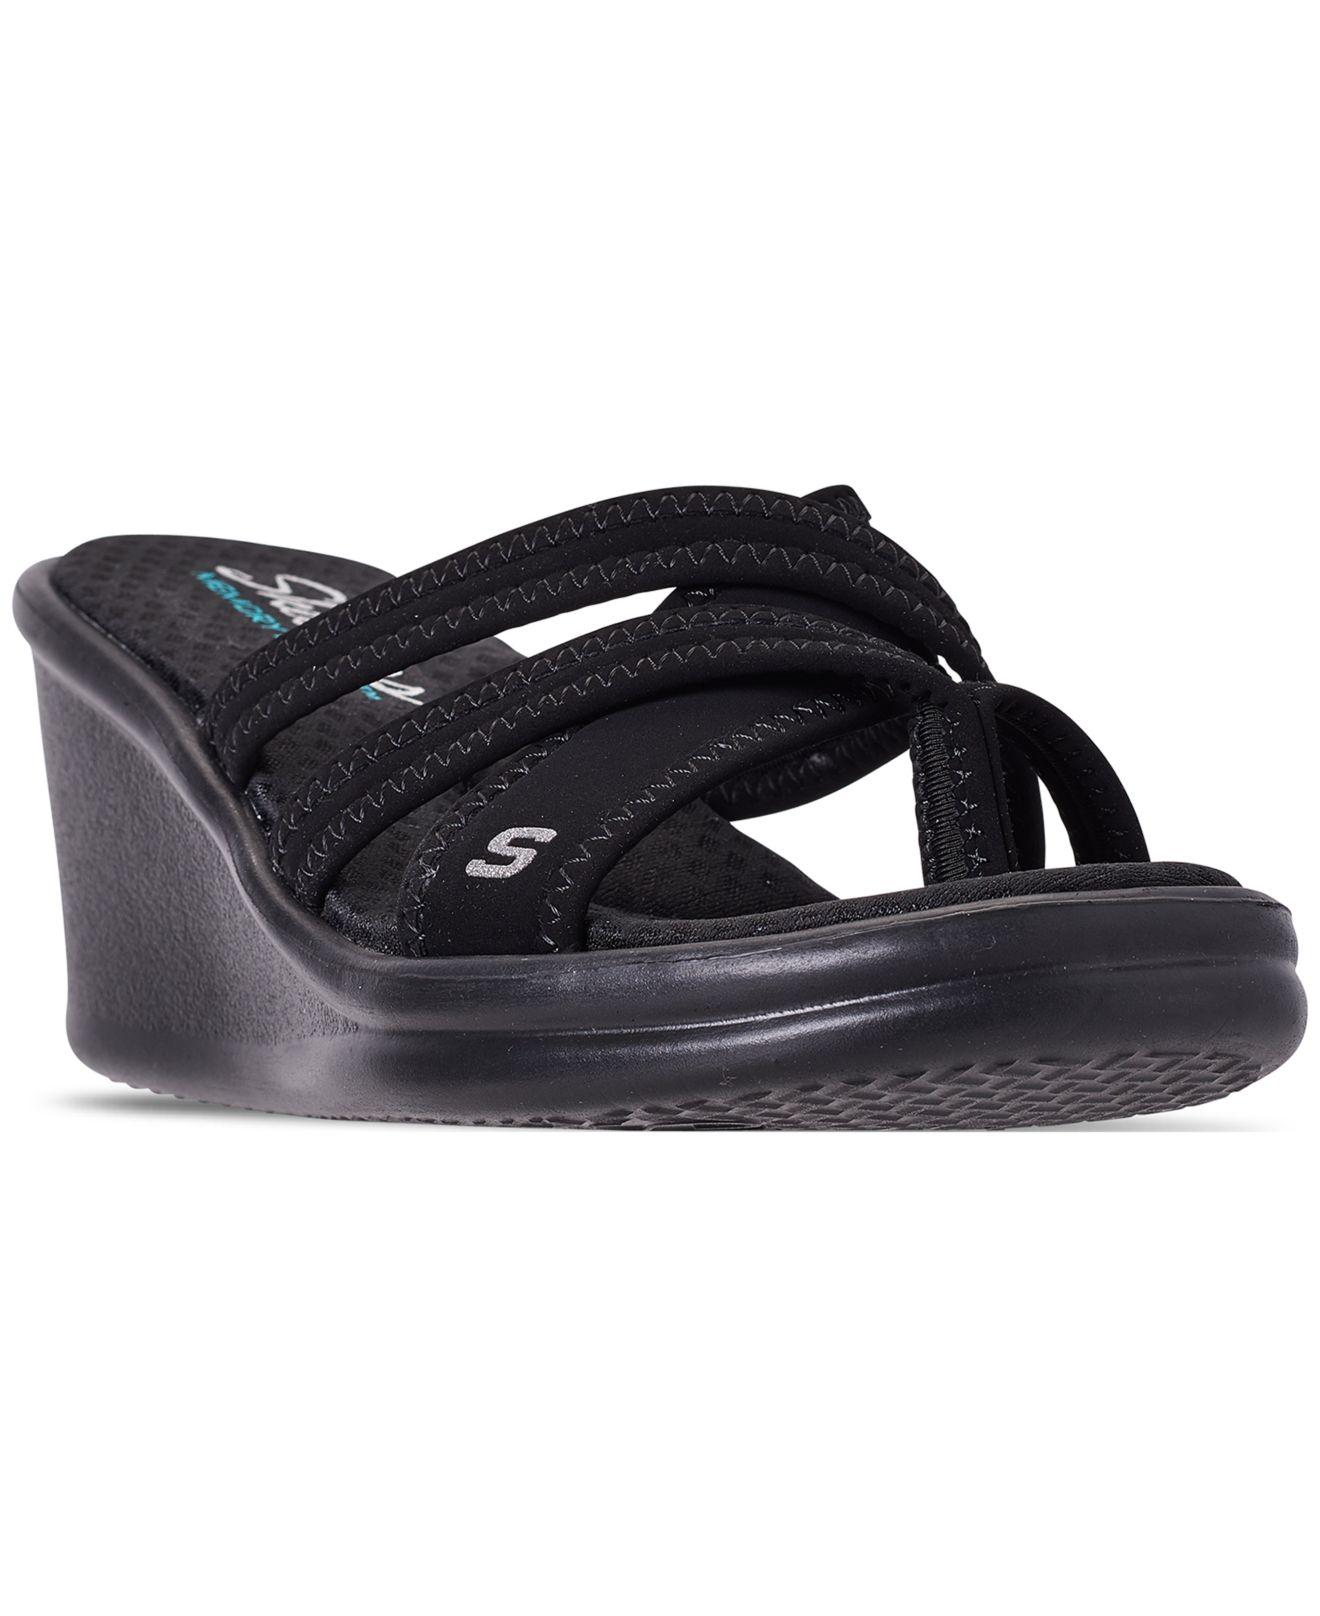 skechers young at heart sandals